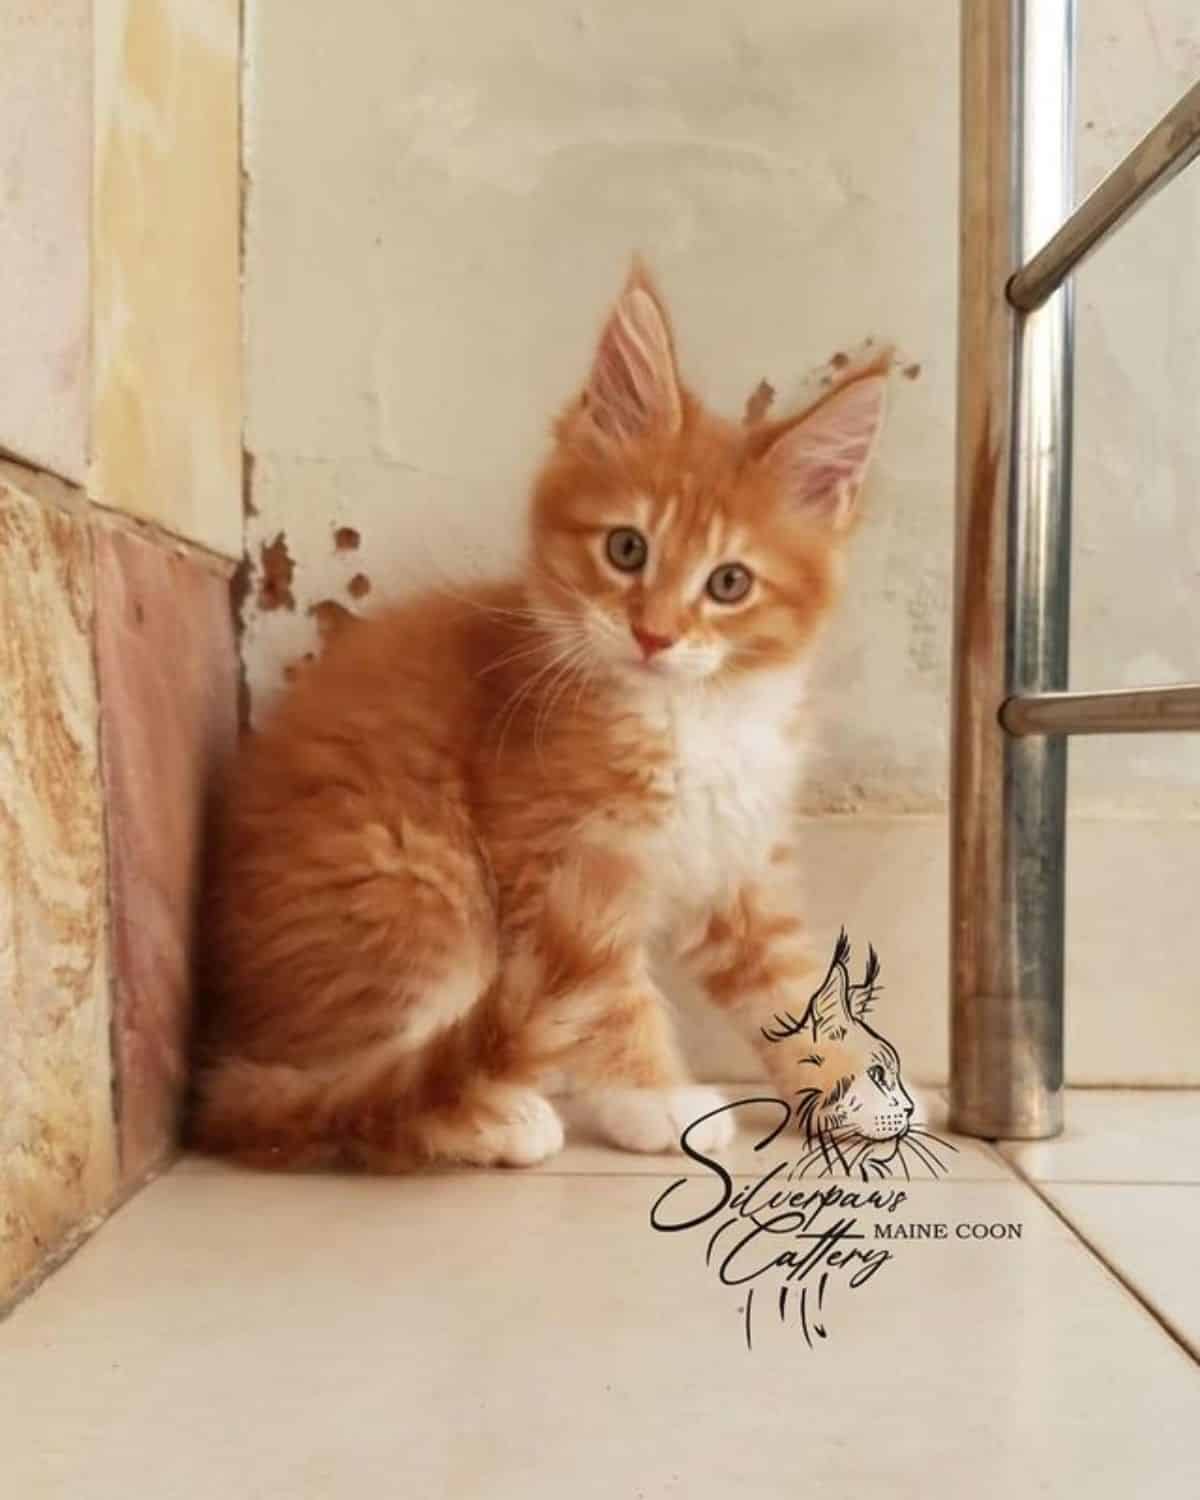 A red-white maine coon kitten sitting on the floor.